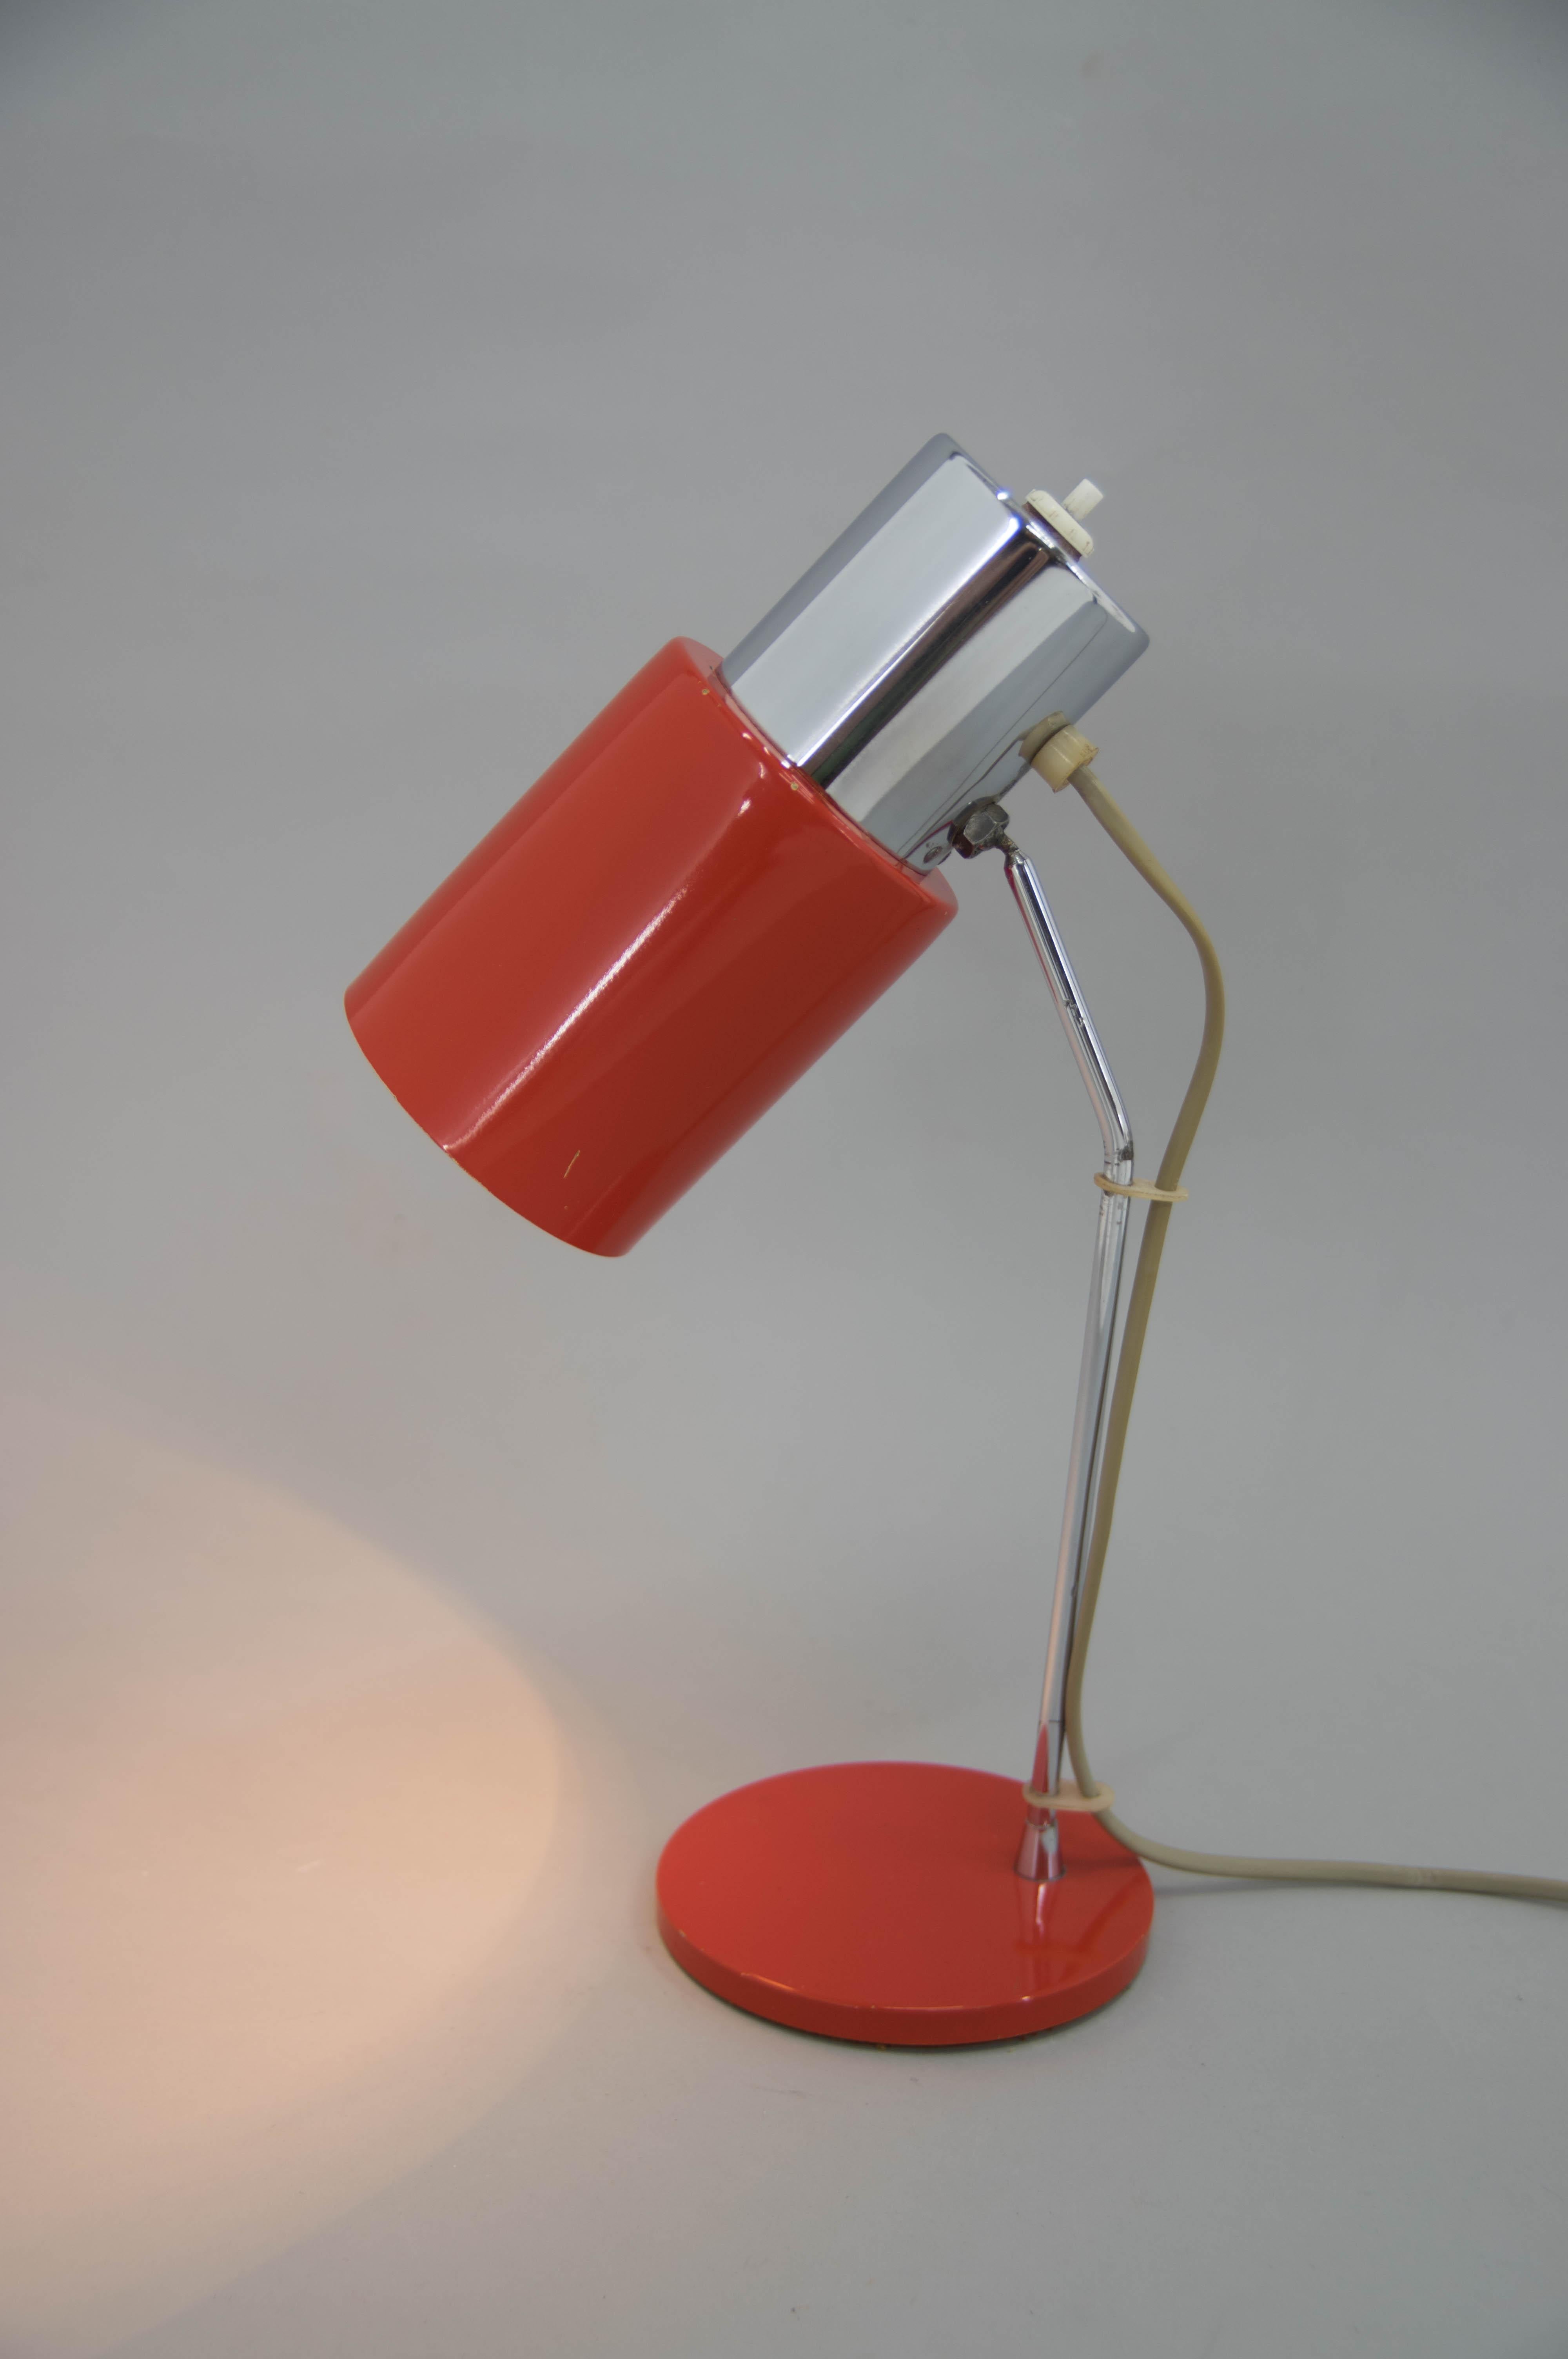 Designed by Josef Hurka for Napako in 1970s in Czechoslovakia.
Made of lacquered metal
Good original condition.
1x60W E25-E27
US plug adapter included.